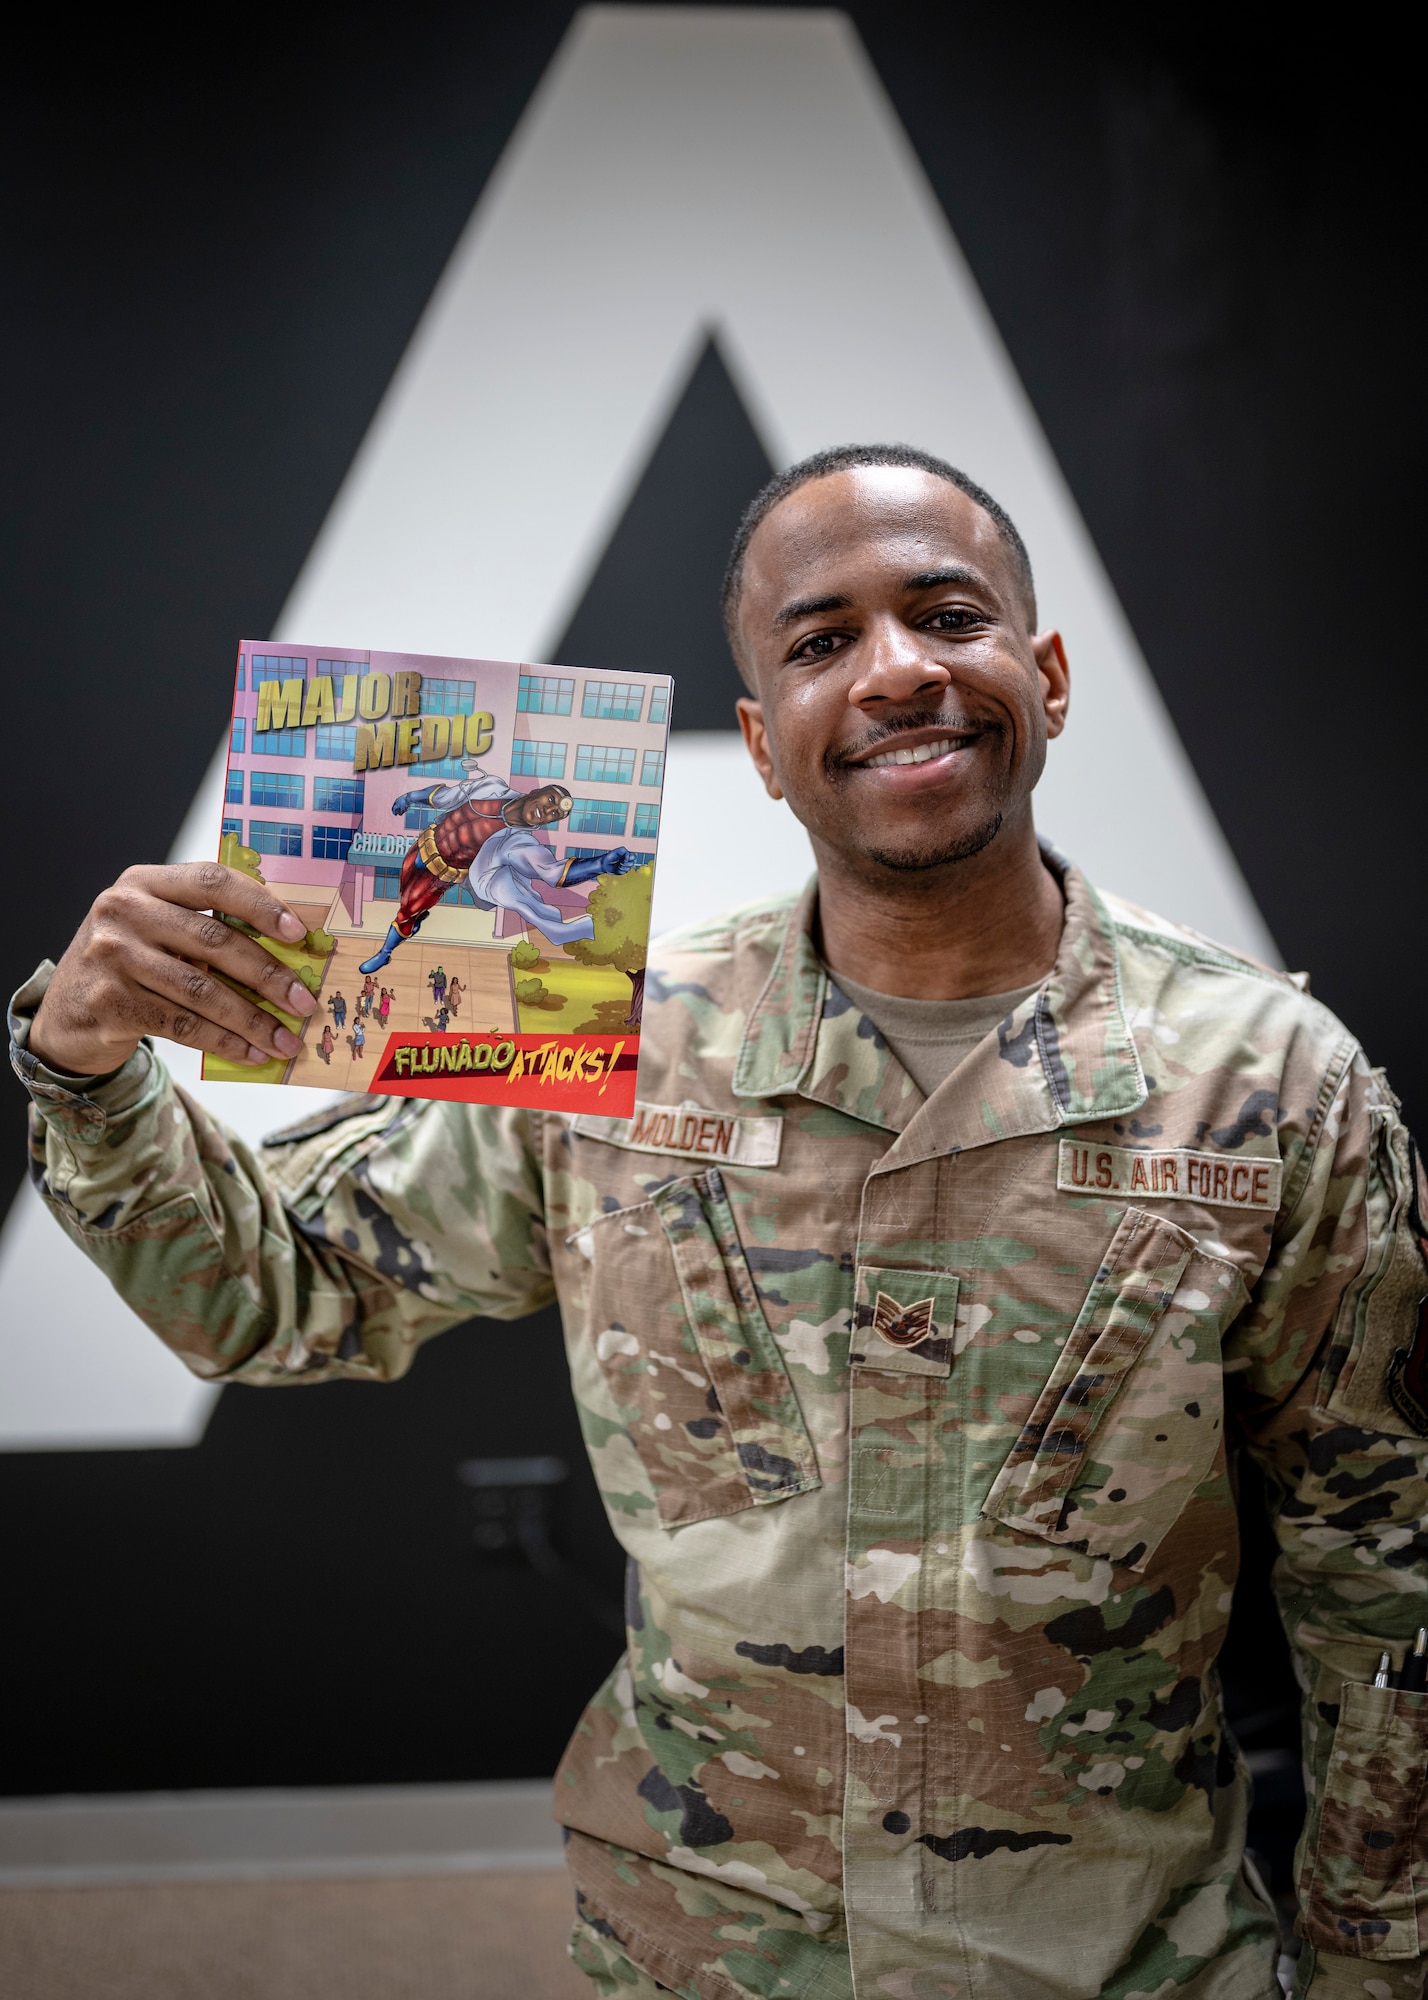 Man in military uniform holds up comic book he created